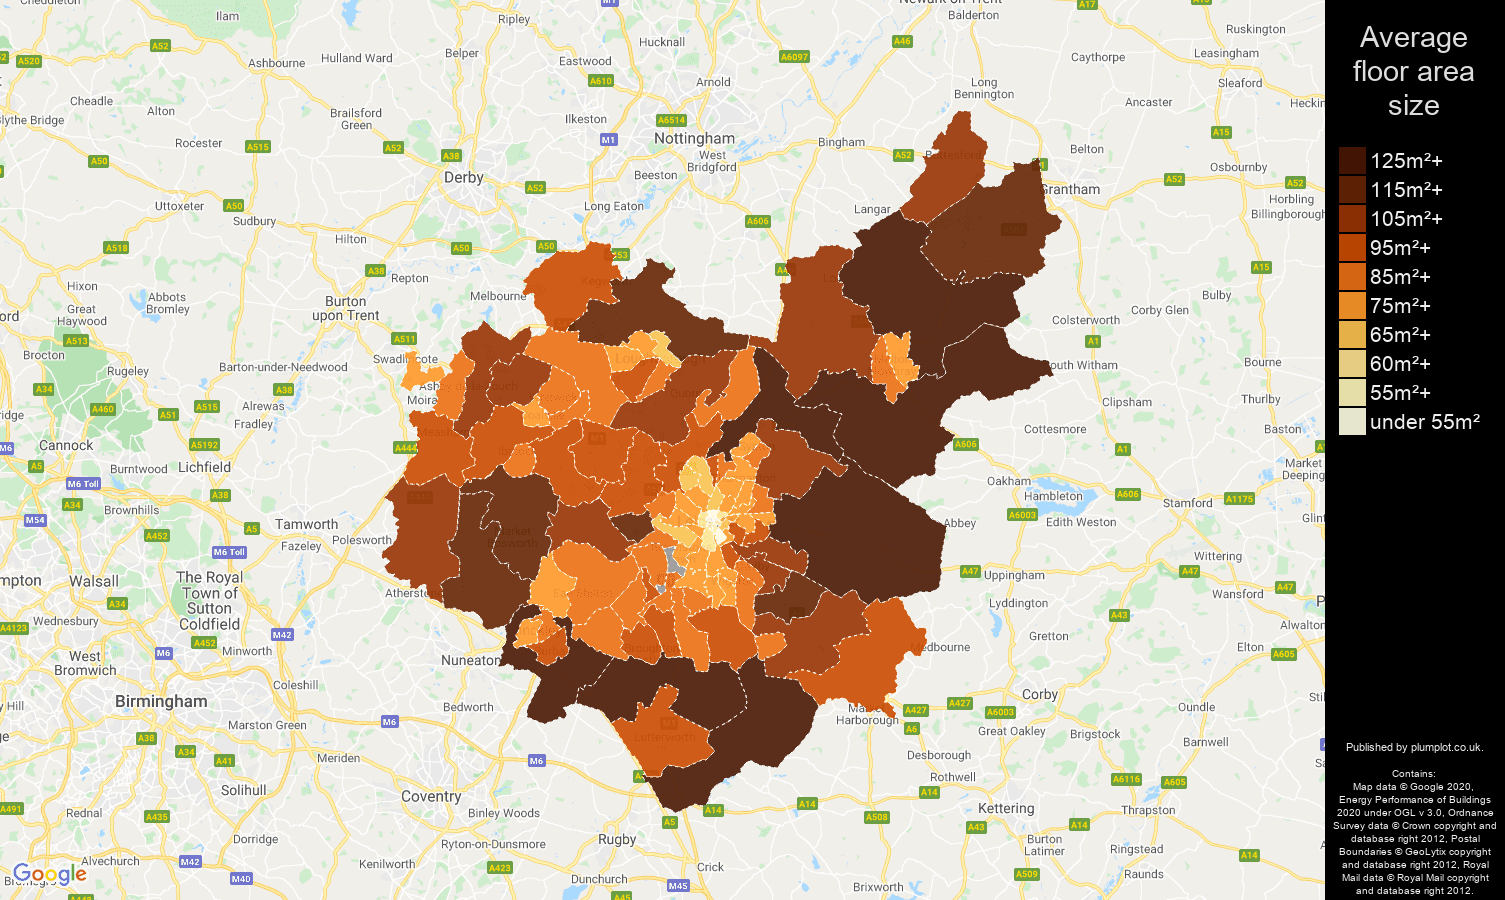 Leicestershire map of average floor area size of properties